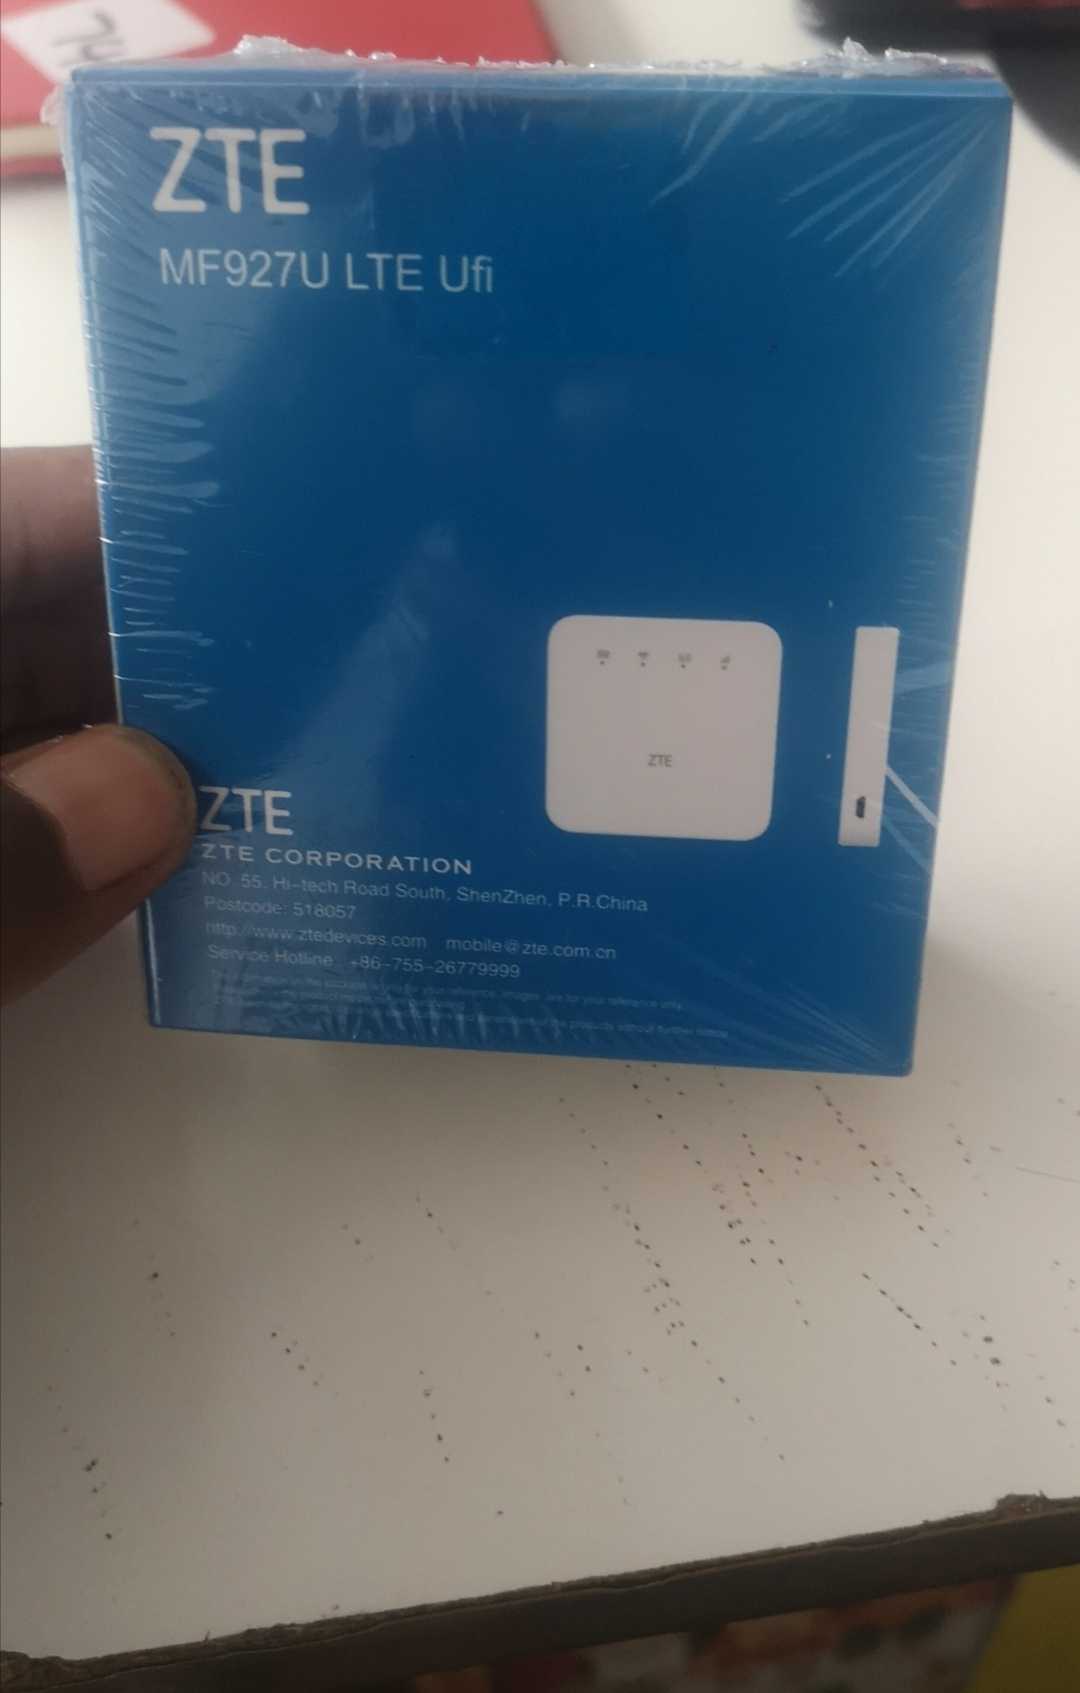 Boxed portable wifi routers